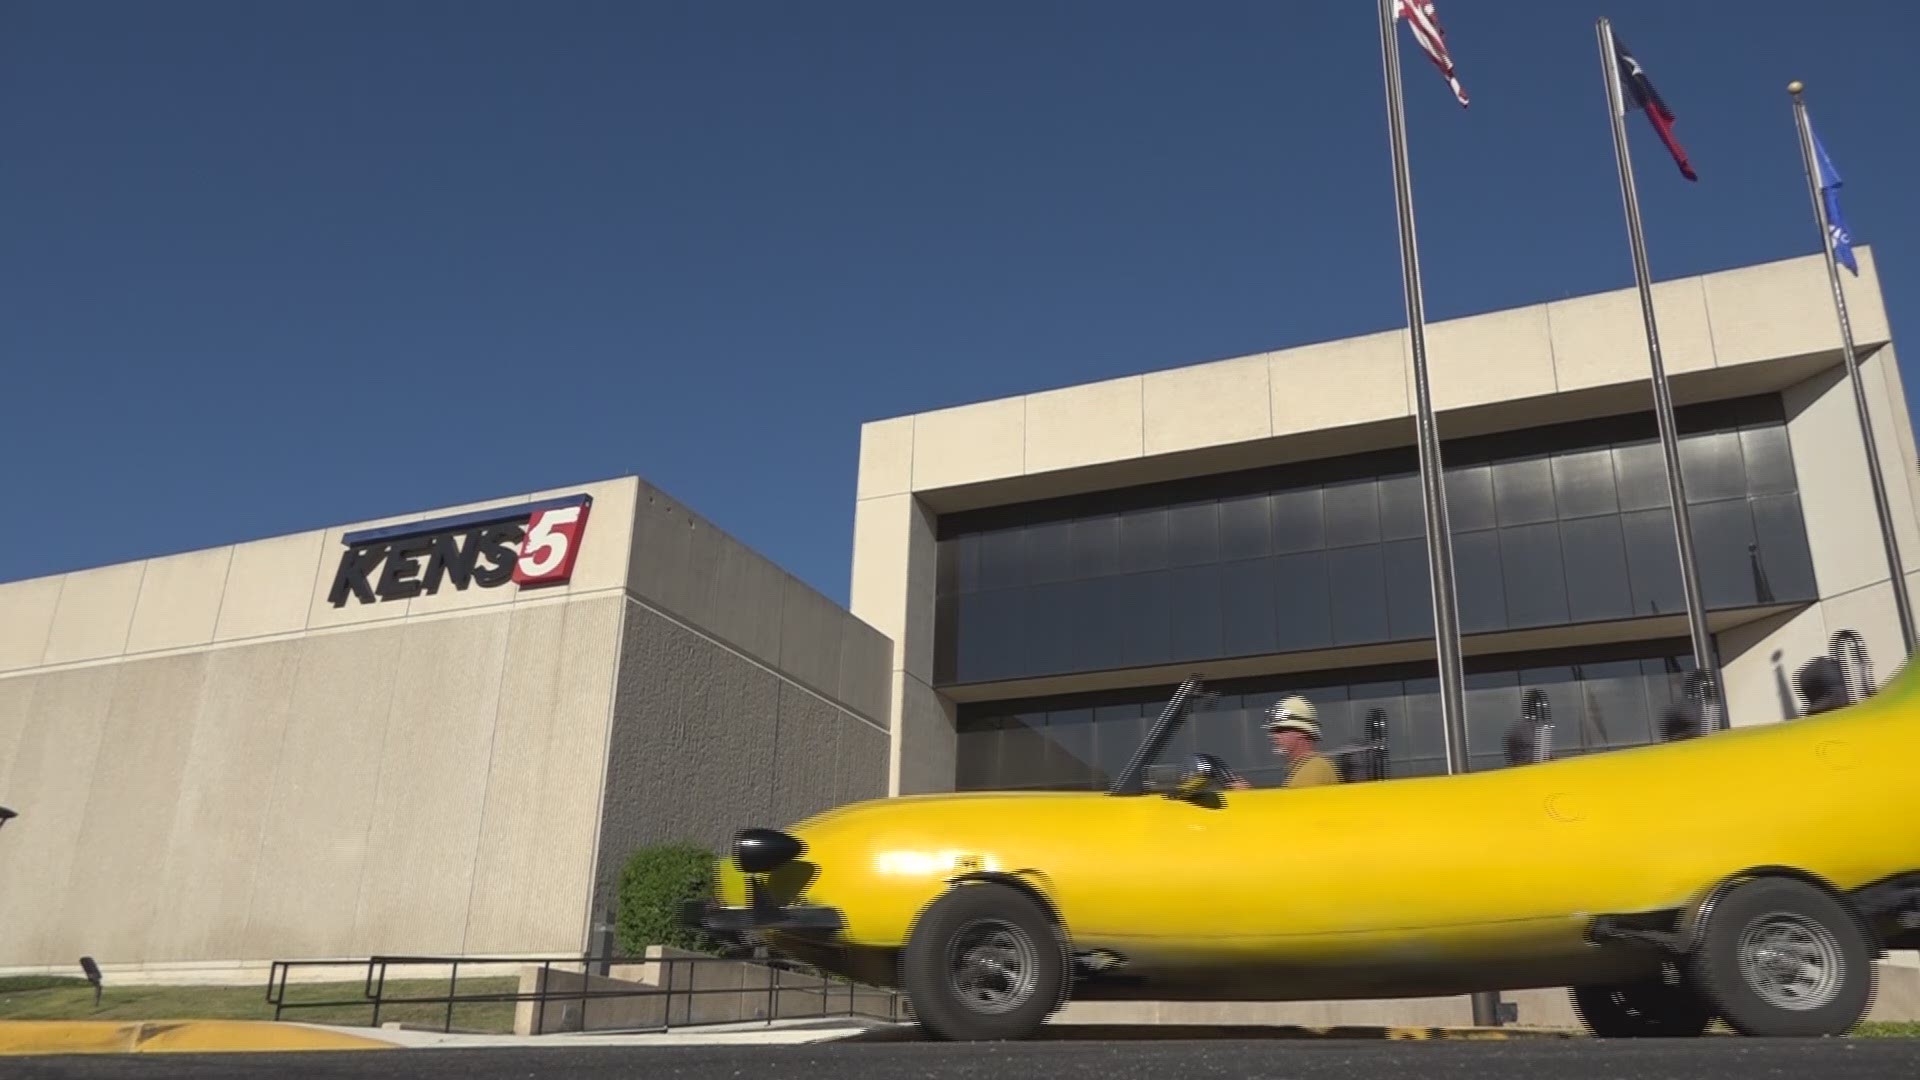 The world's first motorized banana? It may very well be. And if you live in San Antonio, you can ride in it this weekend.